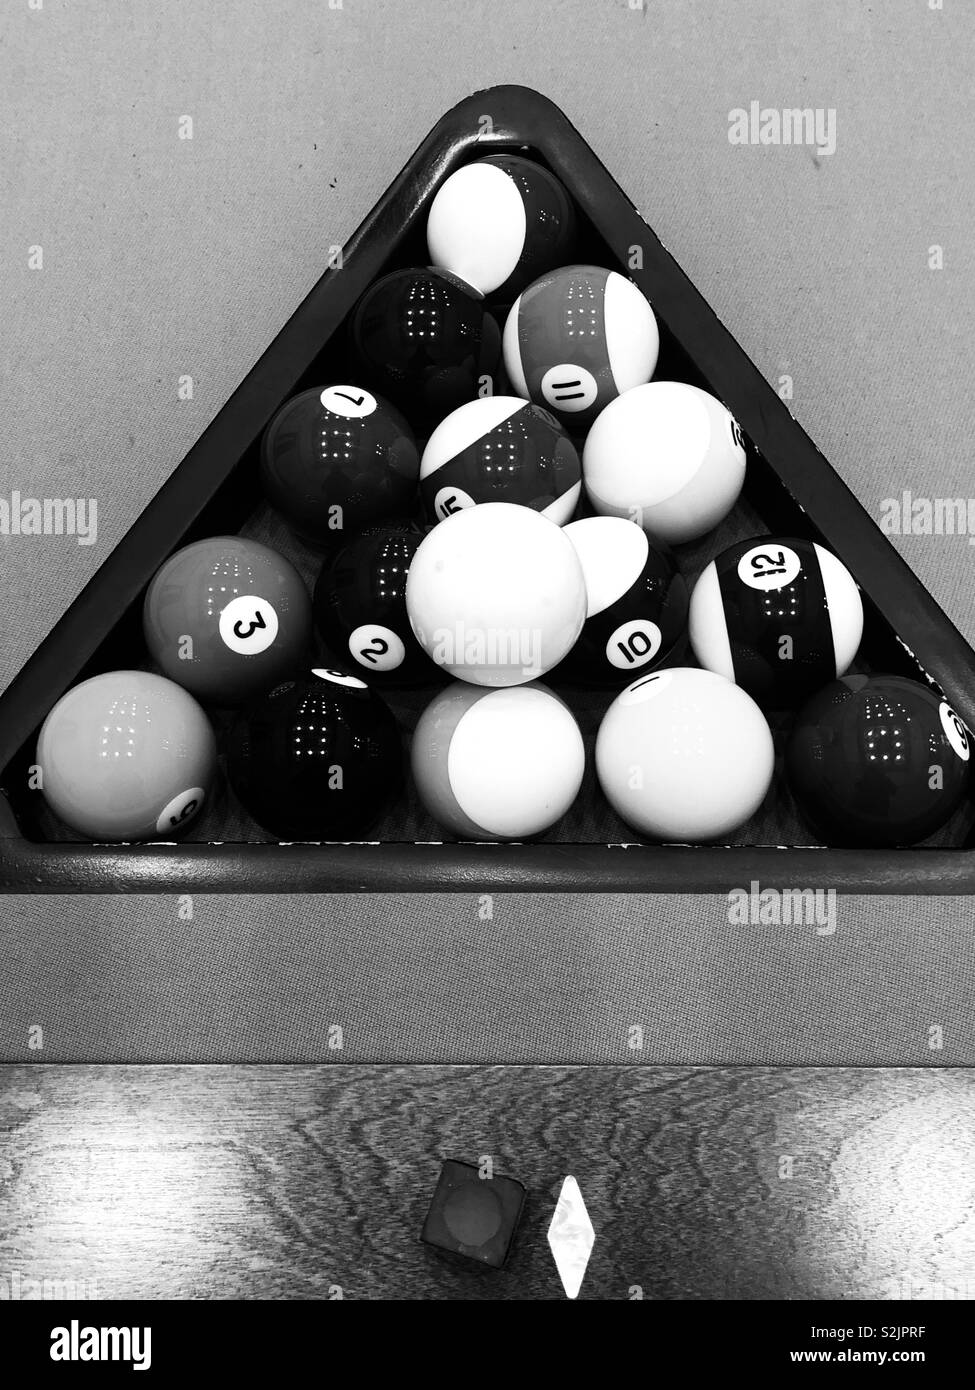 Billiards Black and White Stock Photos & Images - Alamy